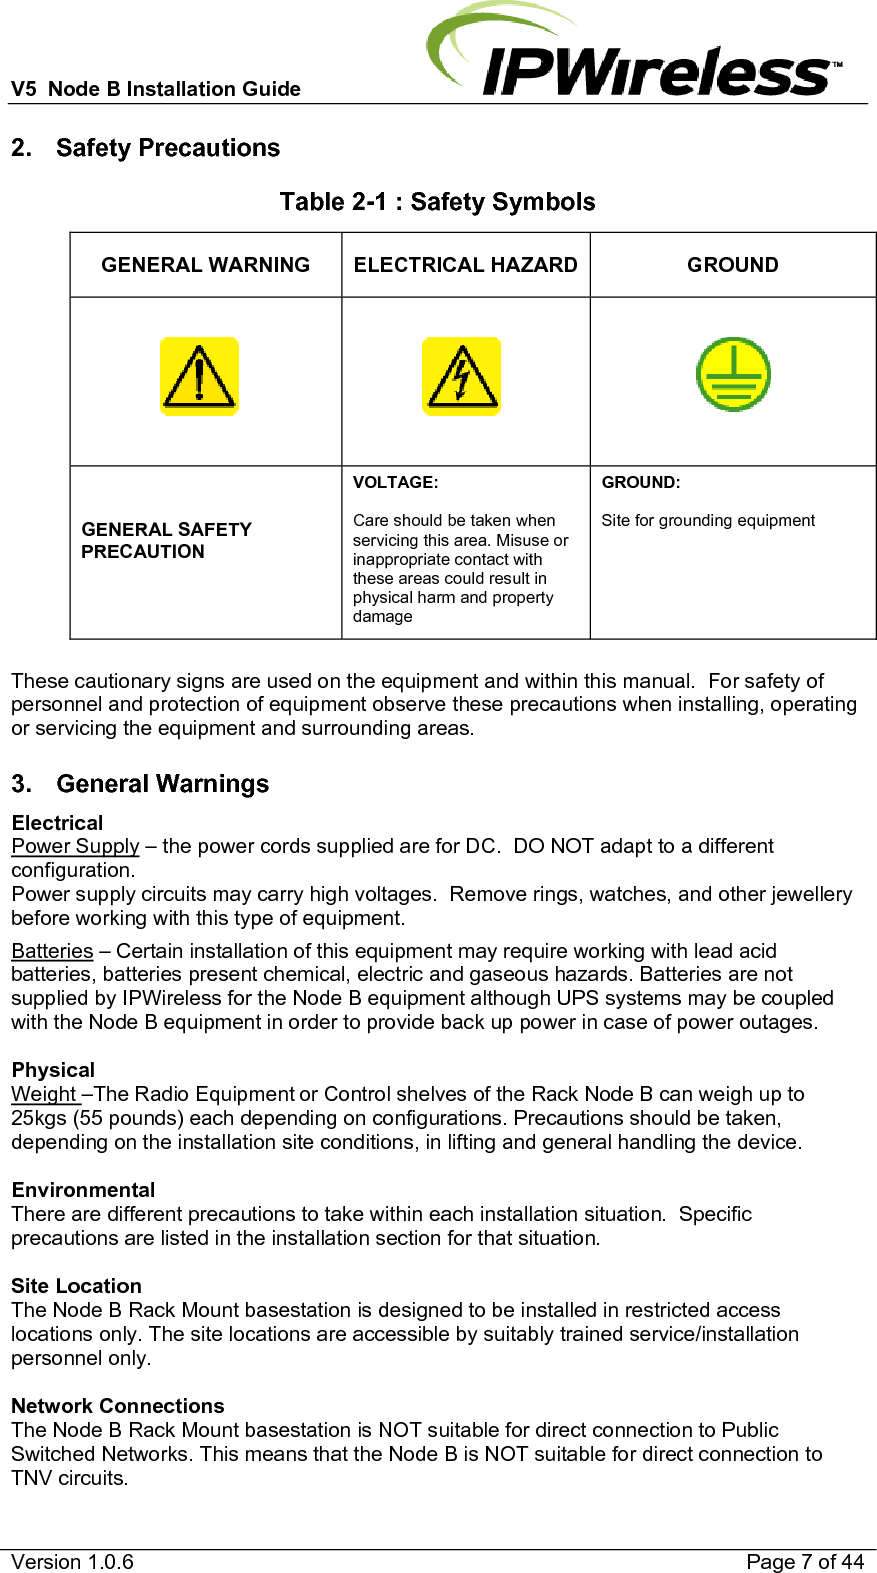 V5  Node B Installation Guide                           Version 1.0.6    Page 7 of 44 2. Safety Precautions Table 2-1 : Safety Symbols GENERAL WARNING  ELECTRICAL HAZARD GROUND    GENERAL SAFETY PRECAUTION  VOLTAGE:  Care should be taken when servicing this area. Misuse or inappropriate contact with these areas could result in physical harm and property damage GROUND:  Site for grounding equipment  These cautionary signs are used on the equipment and within this manual.  For safety of personnel and protection of equipment observe these precautions when installing, operating or servicing the equipment and surrounding areas.  3. General Warnings Electrical Power Supply – the power cords supplied are for DC.  DO NOT adapt to a different configuration. Power supply circuits may carry high voltages.  Remove rings, watches, and other jewellery before working with this type of equipment. Batteries – Certain installation of this equipment may require working with lead acid batteries, batteries present chemical, electric and gaseous hazards. Batteries are not supplied by IPWireless for the Node B equipment although UPS systems may be coupled with the Node B equipment in order to provide back up power in case of power outages.  Physical Weight –The Radio Equipment or Control shelves of the Rack Node B can weigh up to 25kgs (55 pounds) each depending on configurations. Precautions should be taken, depending on the installation site conditions, in lifting and general handling the device.  Environmental There are different precautions to take within each installation situation.  Specific precautions are listed in the installation section for that situation.  Site Location The Node B Rack Mount basestation is designed to be installed in restricted access locations only. The site locations are accessible by suitably trained service/installation personnel only.  Network Connections The Node B Rack Mount basestation is NOT suitable for direct connection to Public Switched Networks. This means that the Node B is NOT suitable for direct connection to TNV circuits. 